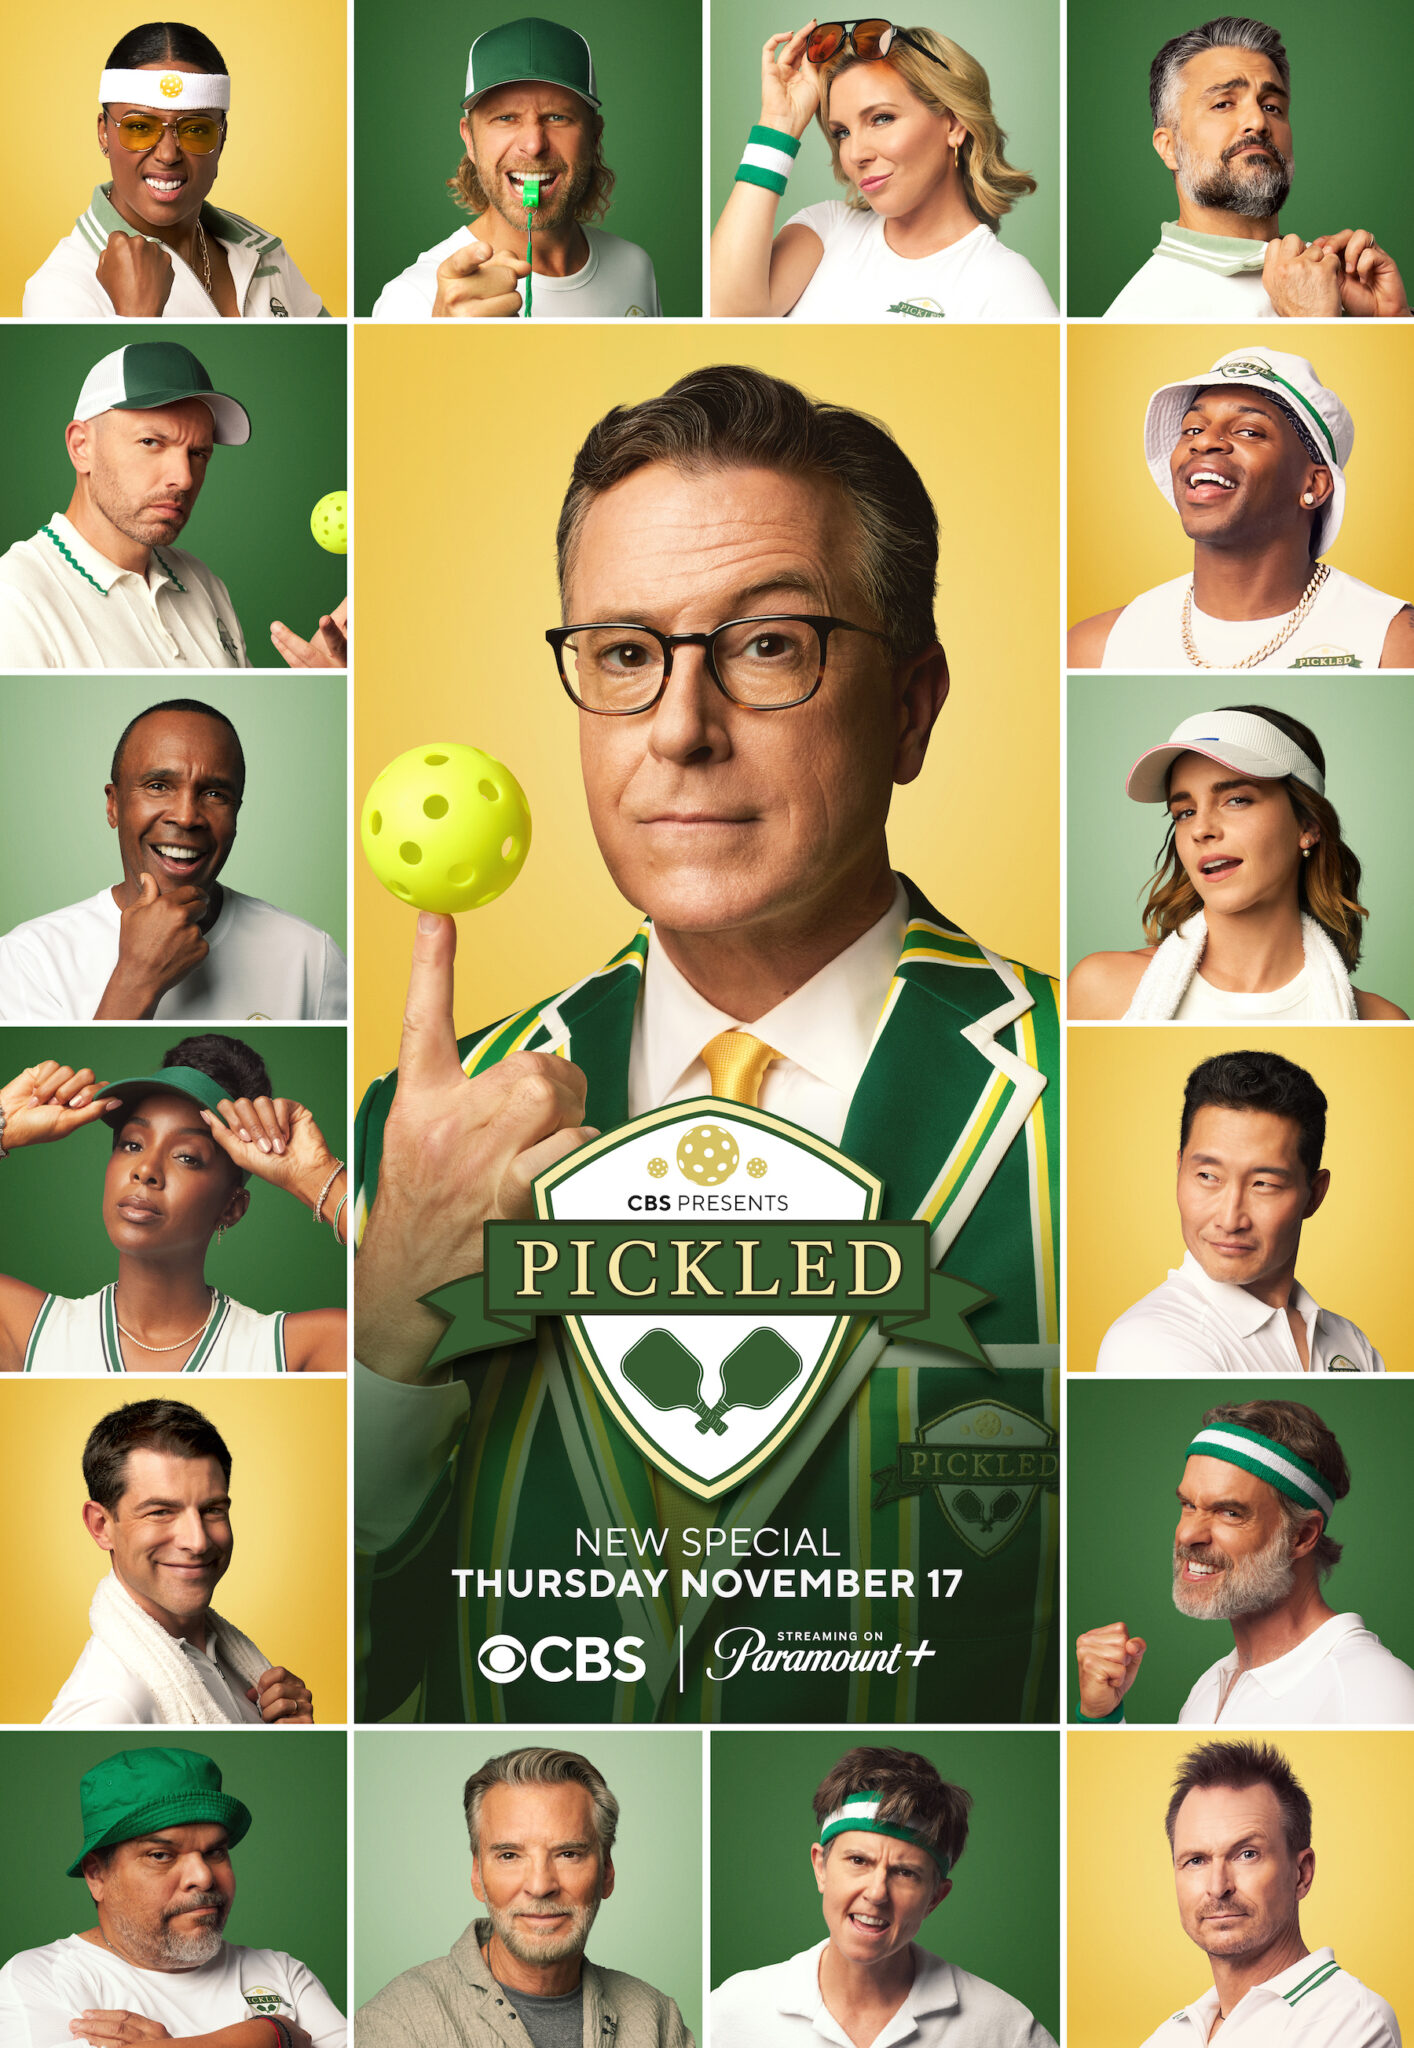 All sixteen celebrities ready for "Pickled".